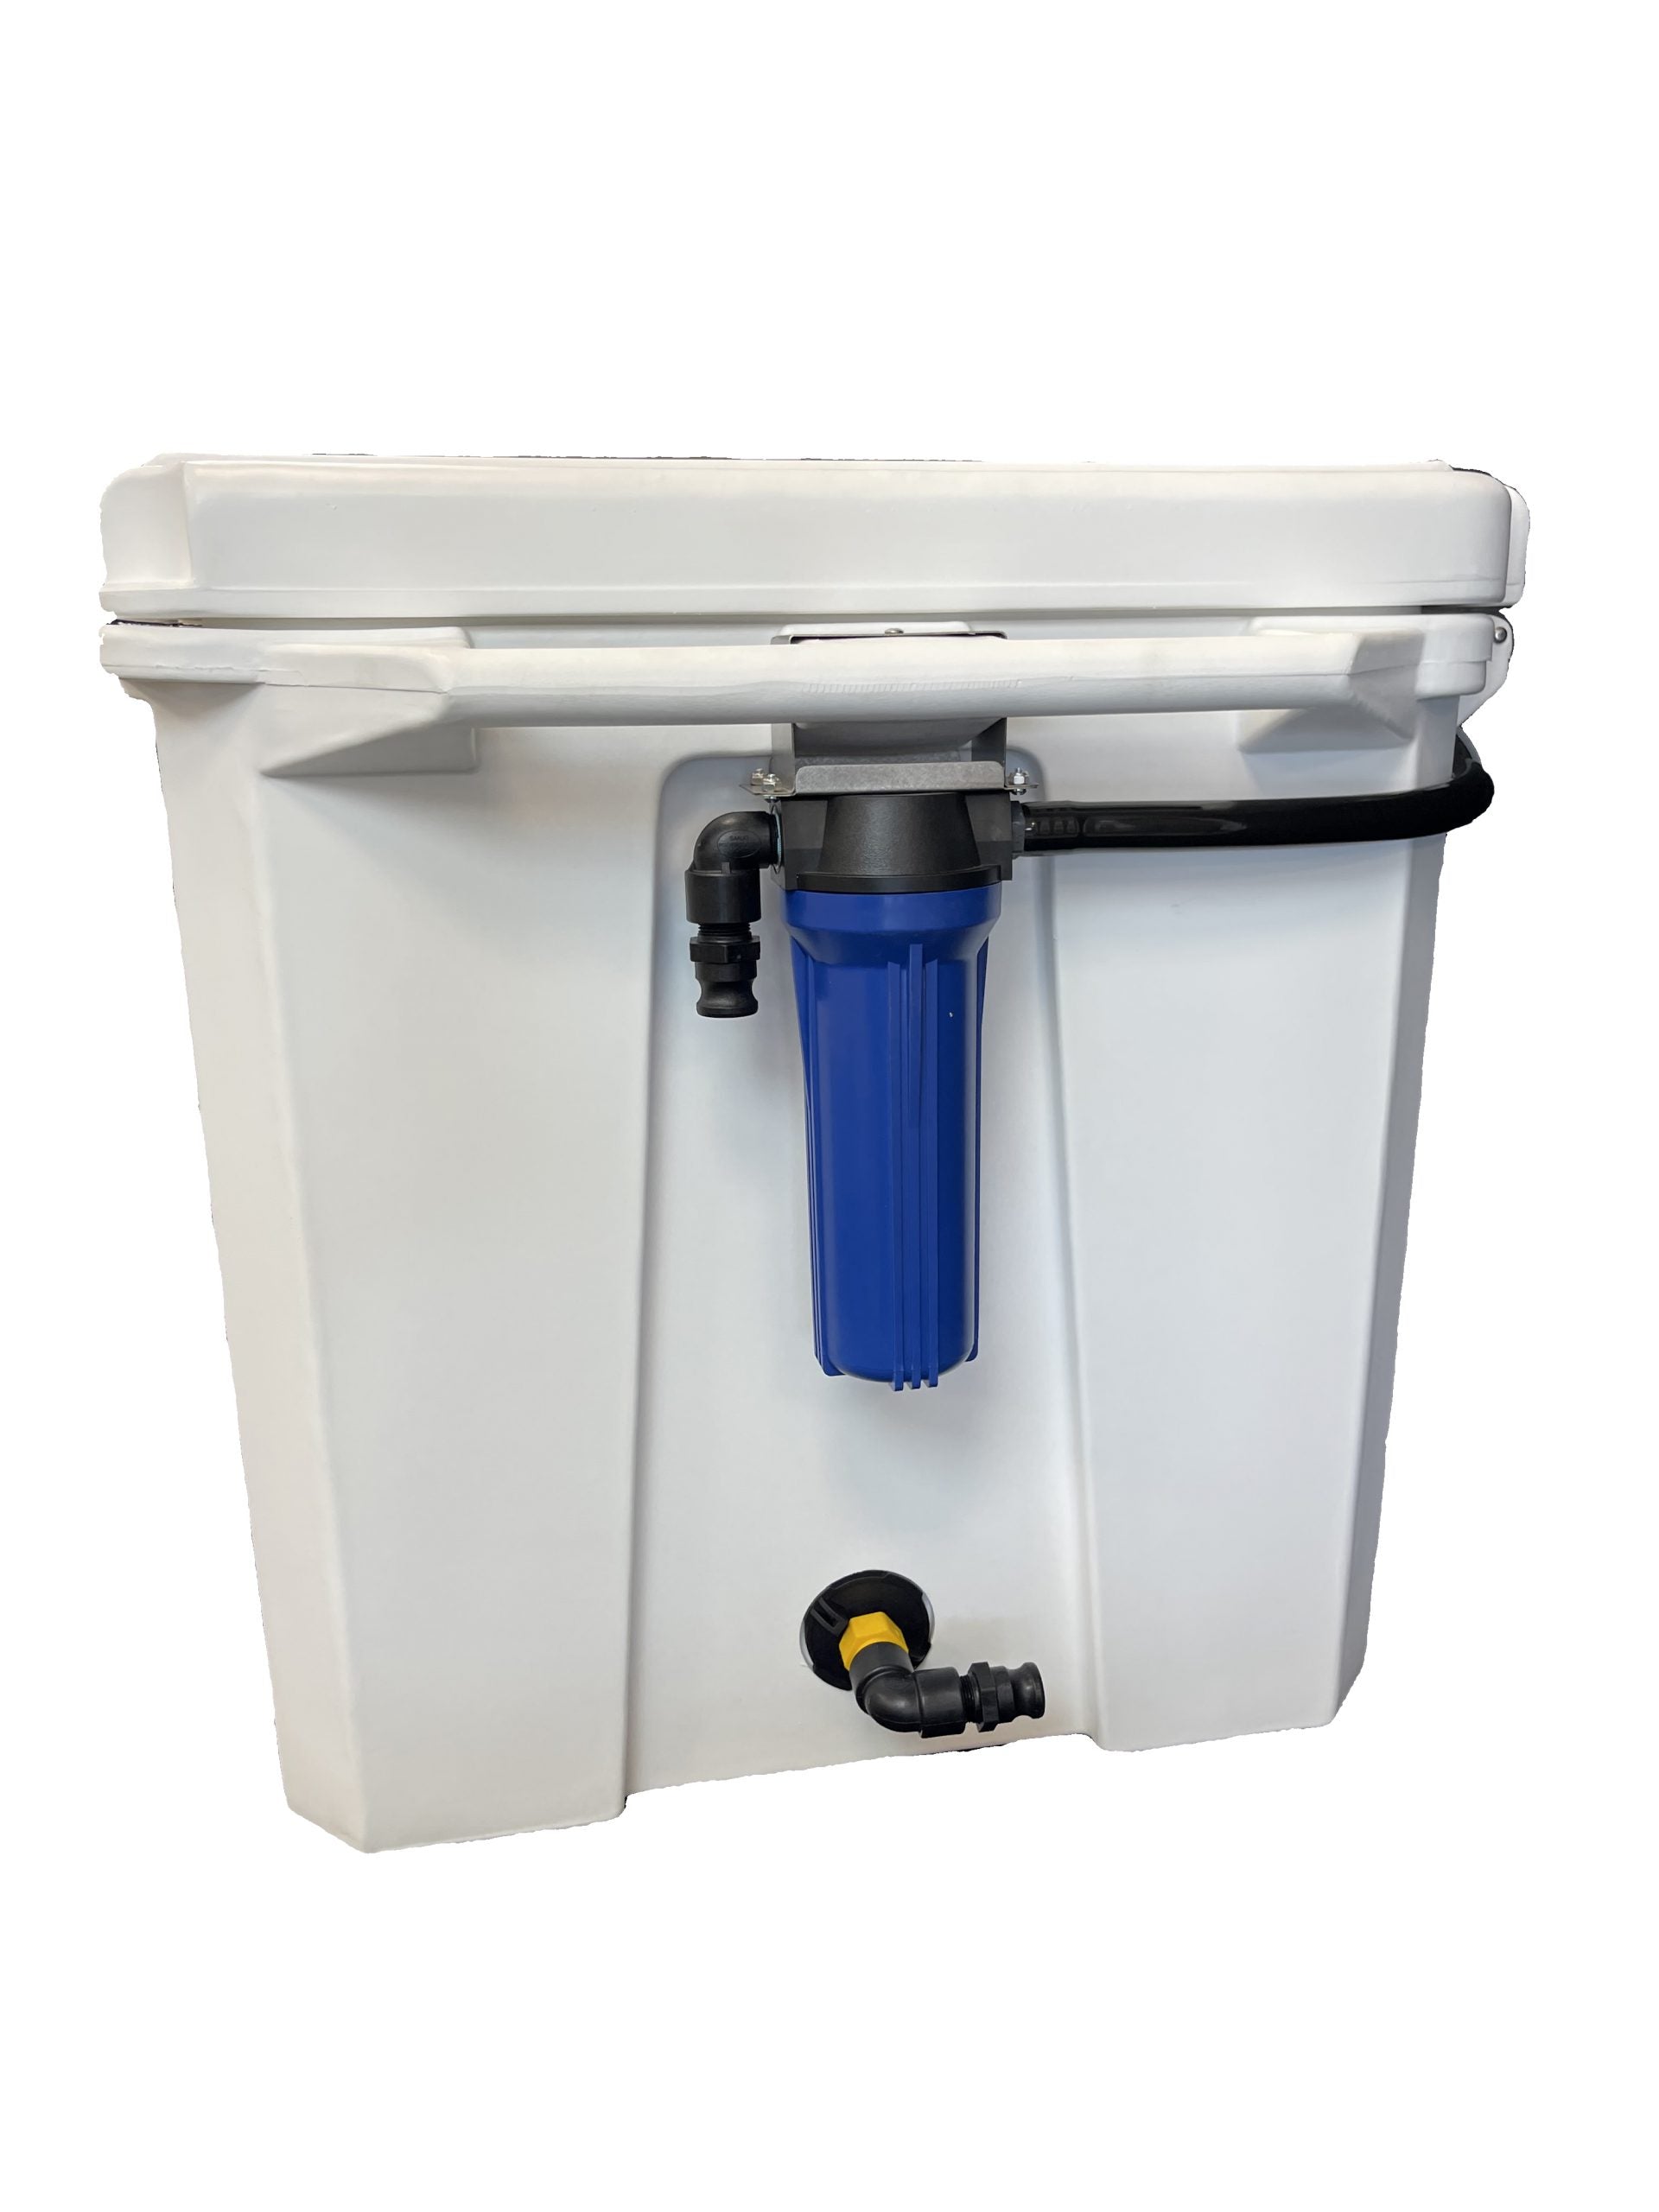 Penguin Chiller side view with water filter